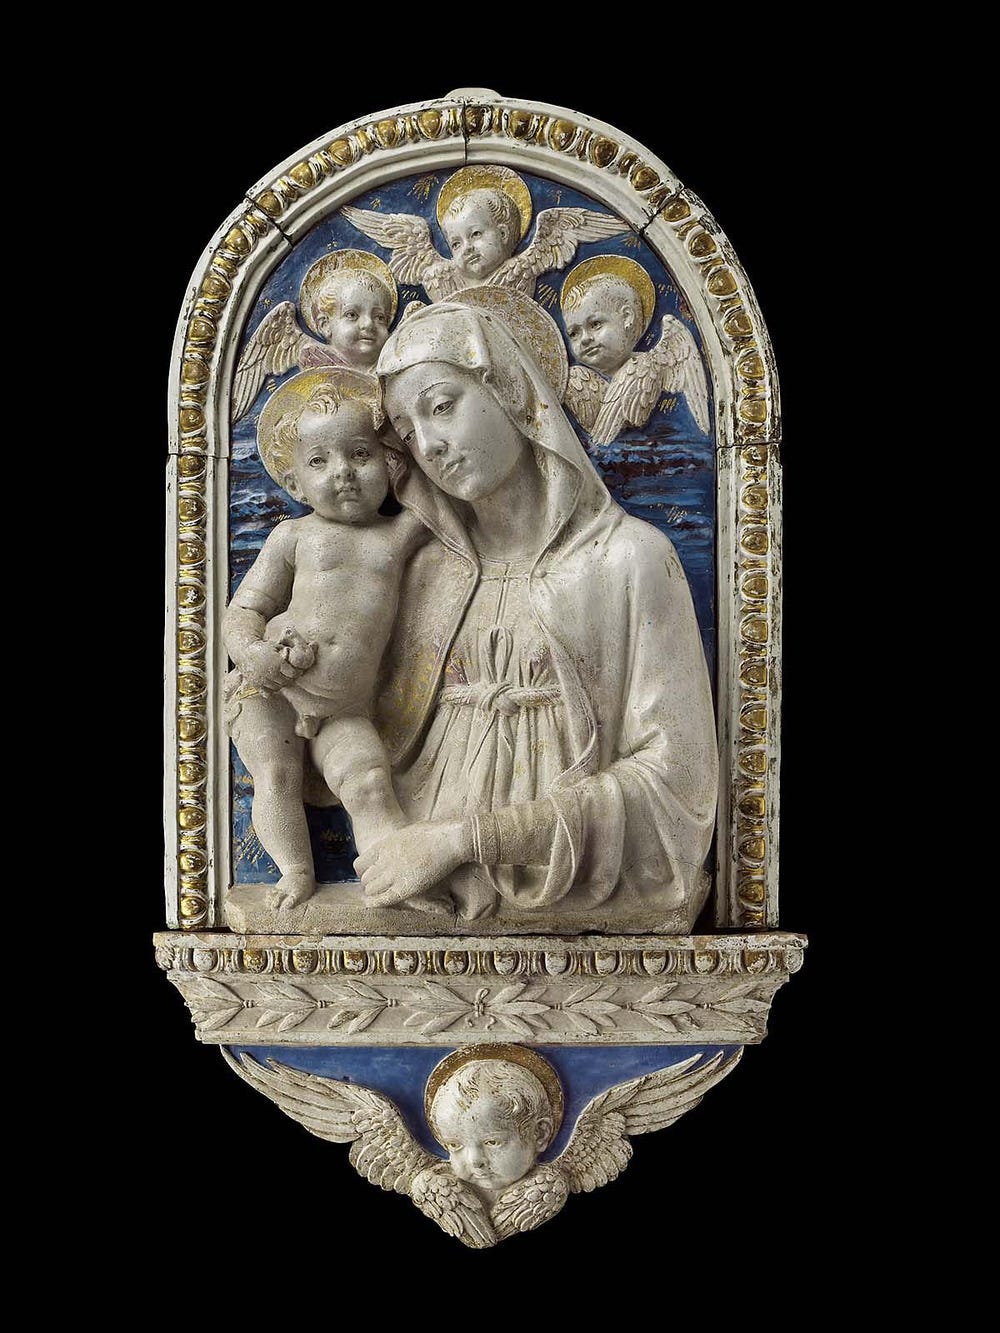 Virgin Mary and Child relief with gold detailing